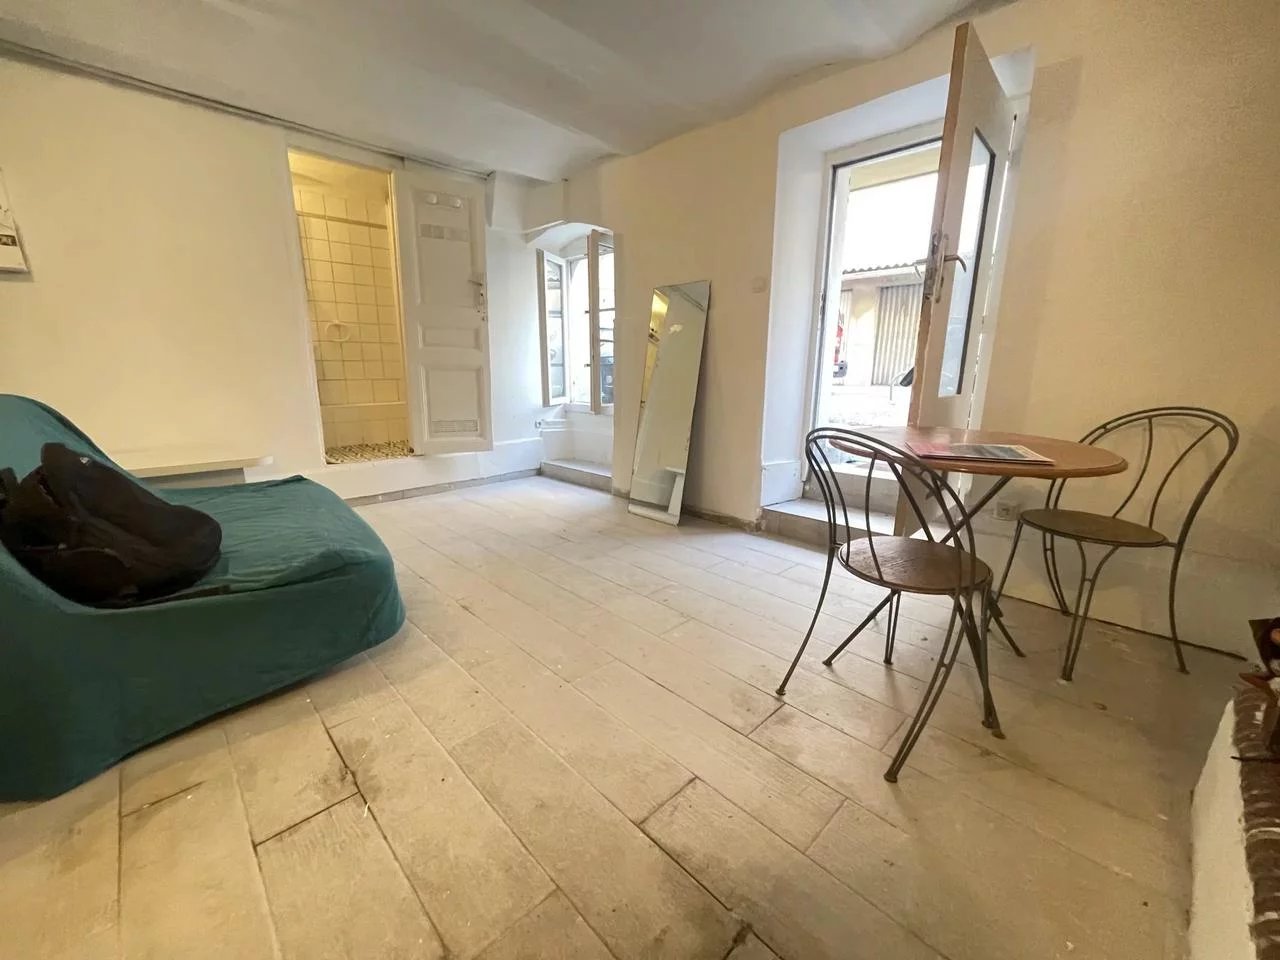 Appartement  1 Rooms 27.15m2  for sale    99 000 €